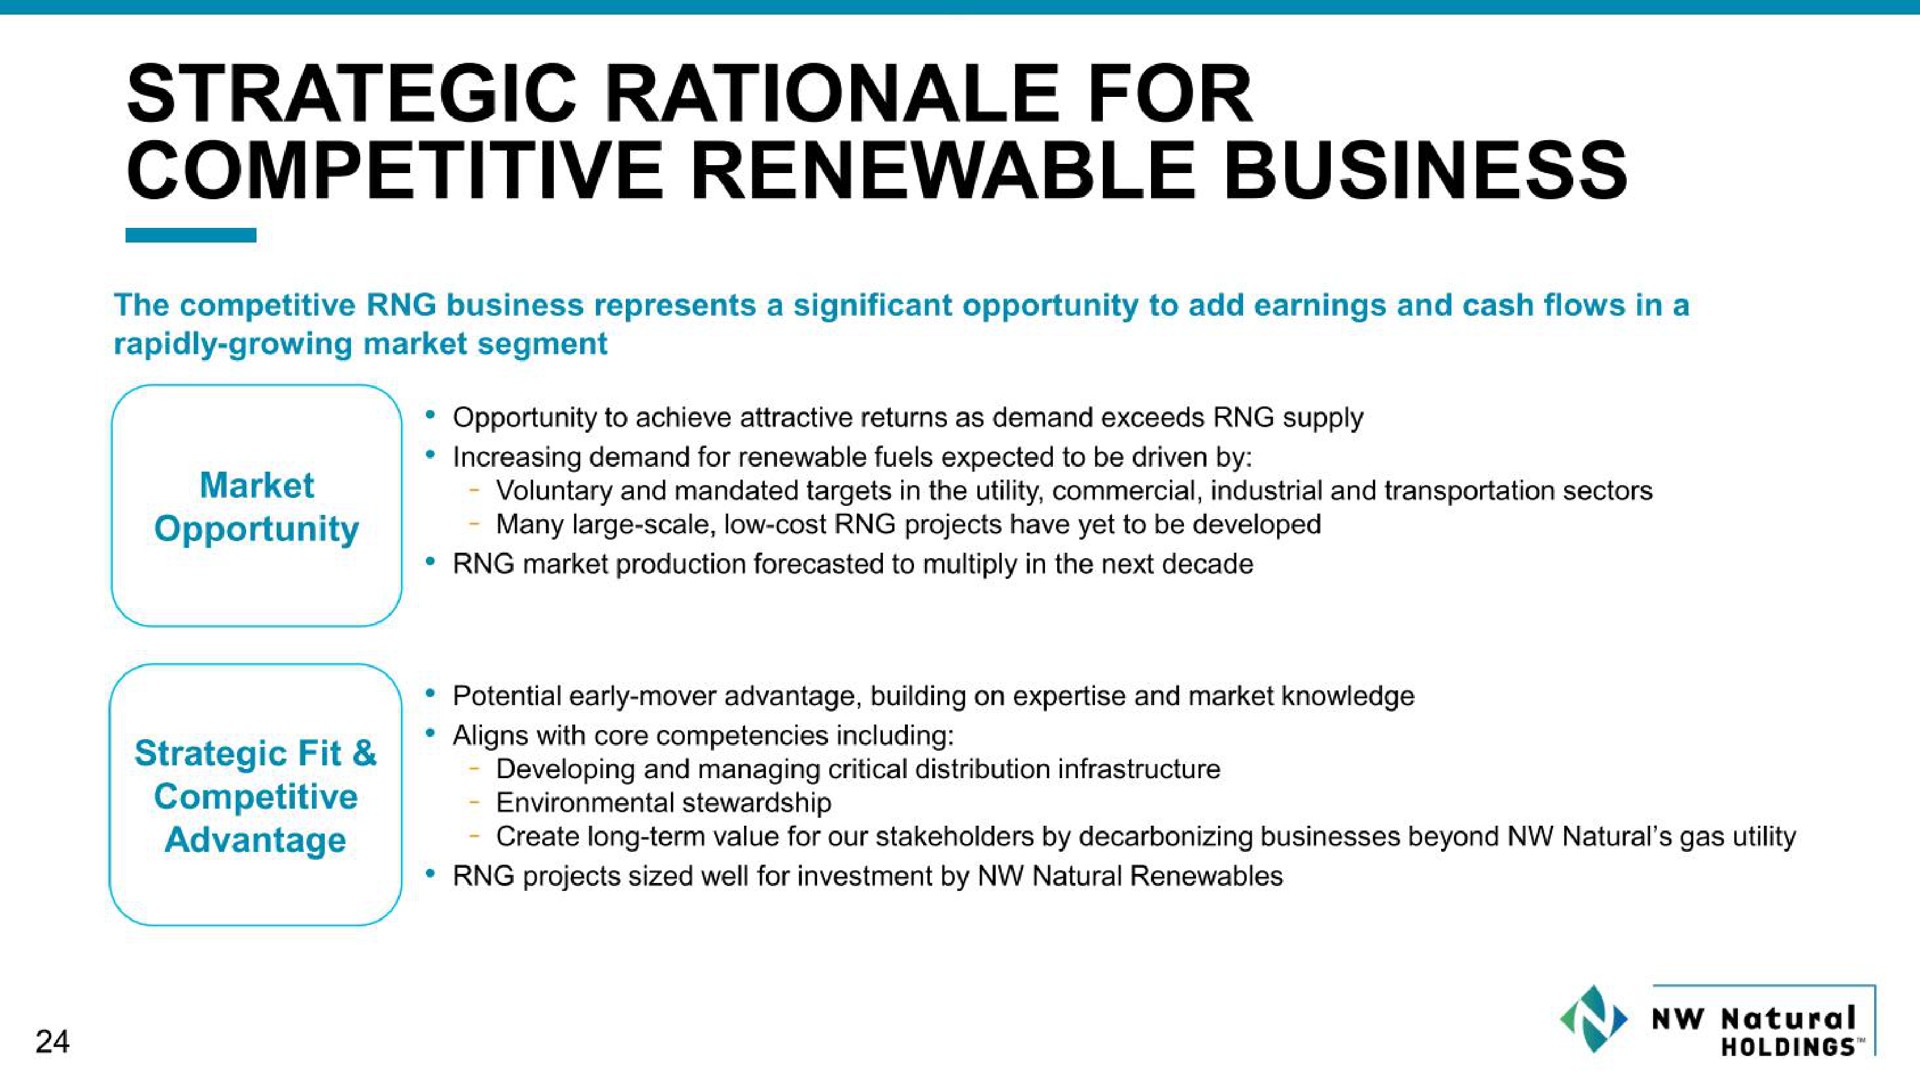 strategic rationale for competitive renewable business | NW Natural Holdings